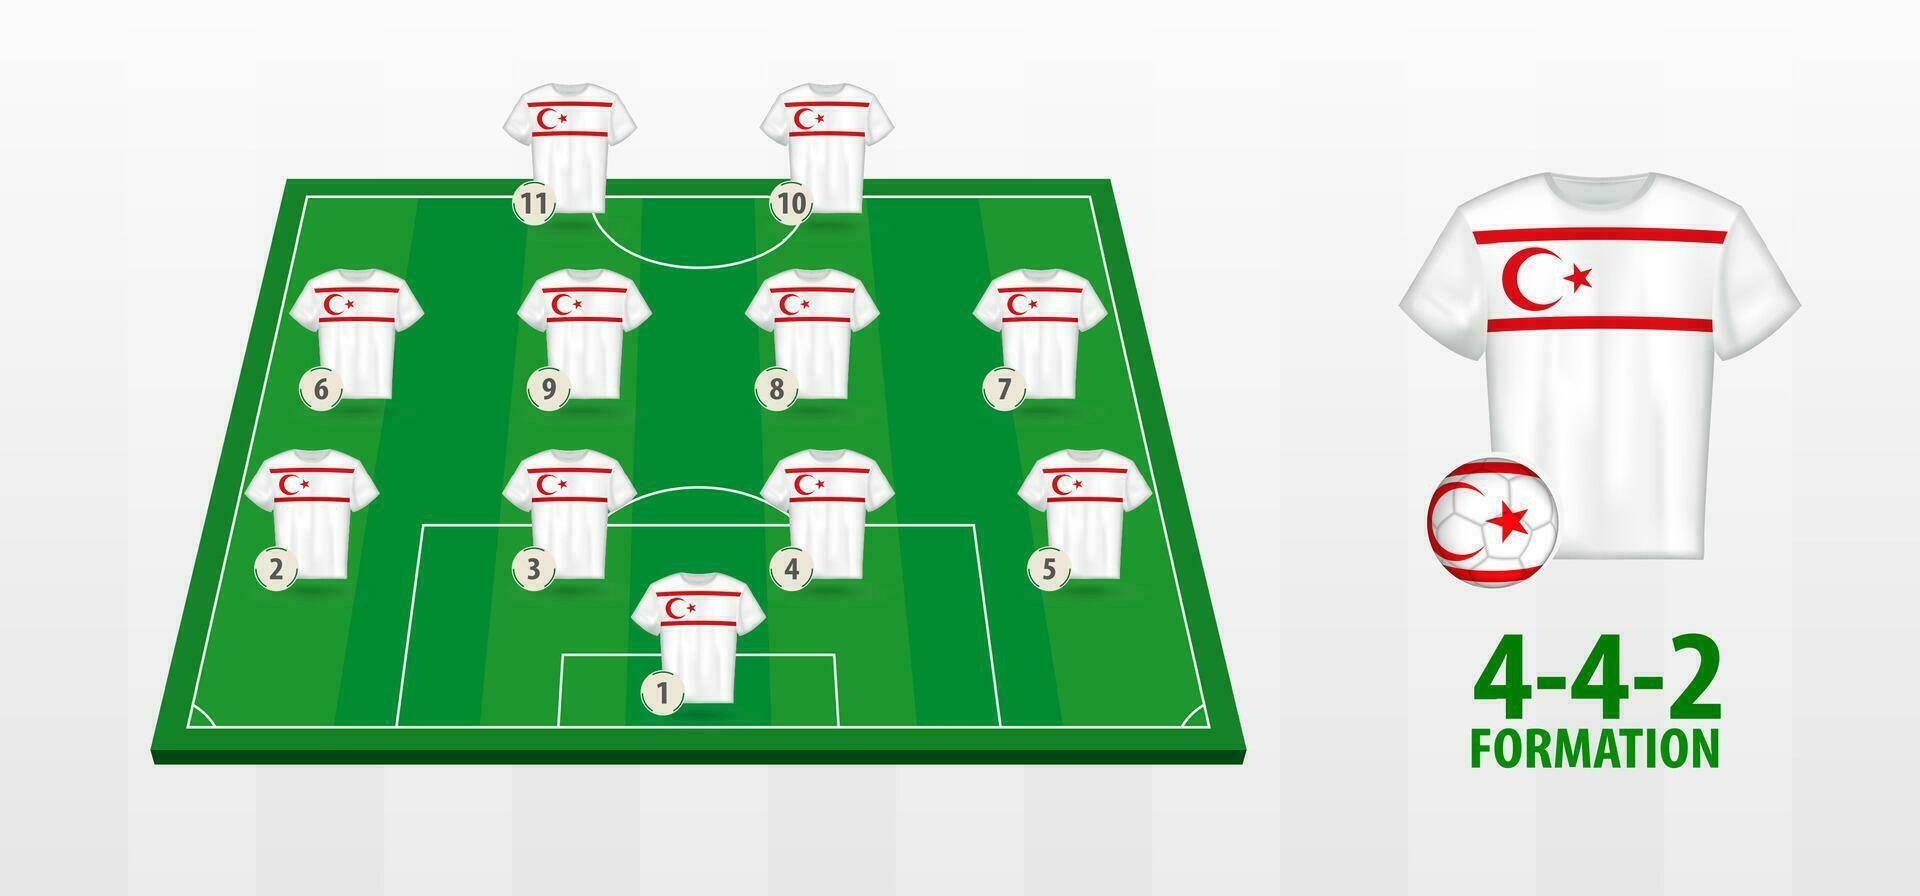 Northern Cyprus National Football Team Formation on Football Field. vector